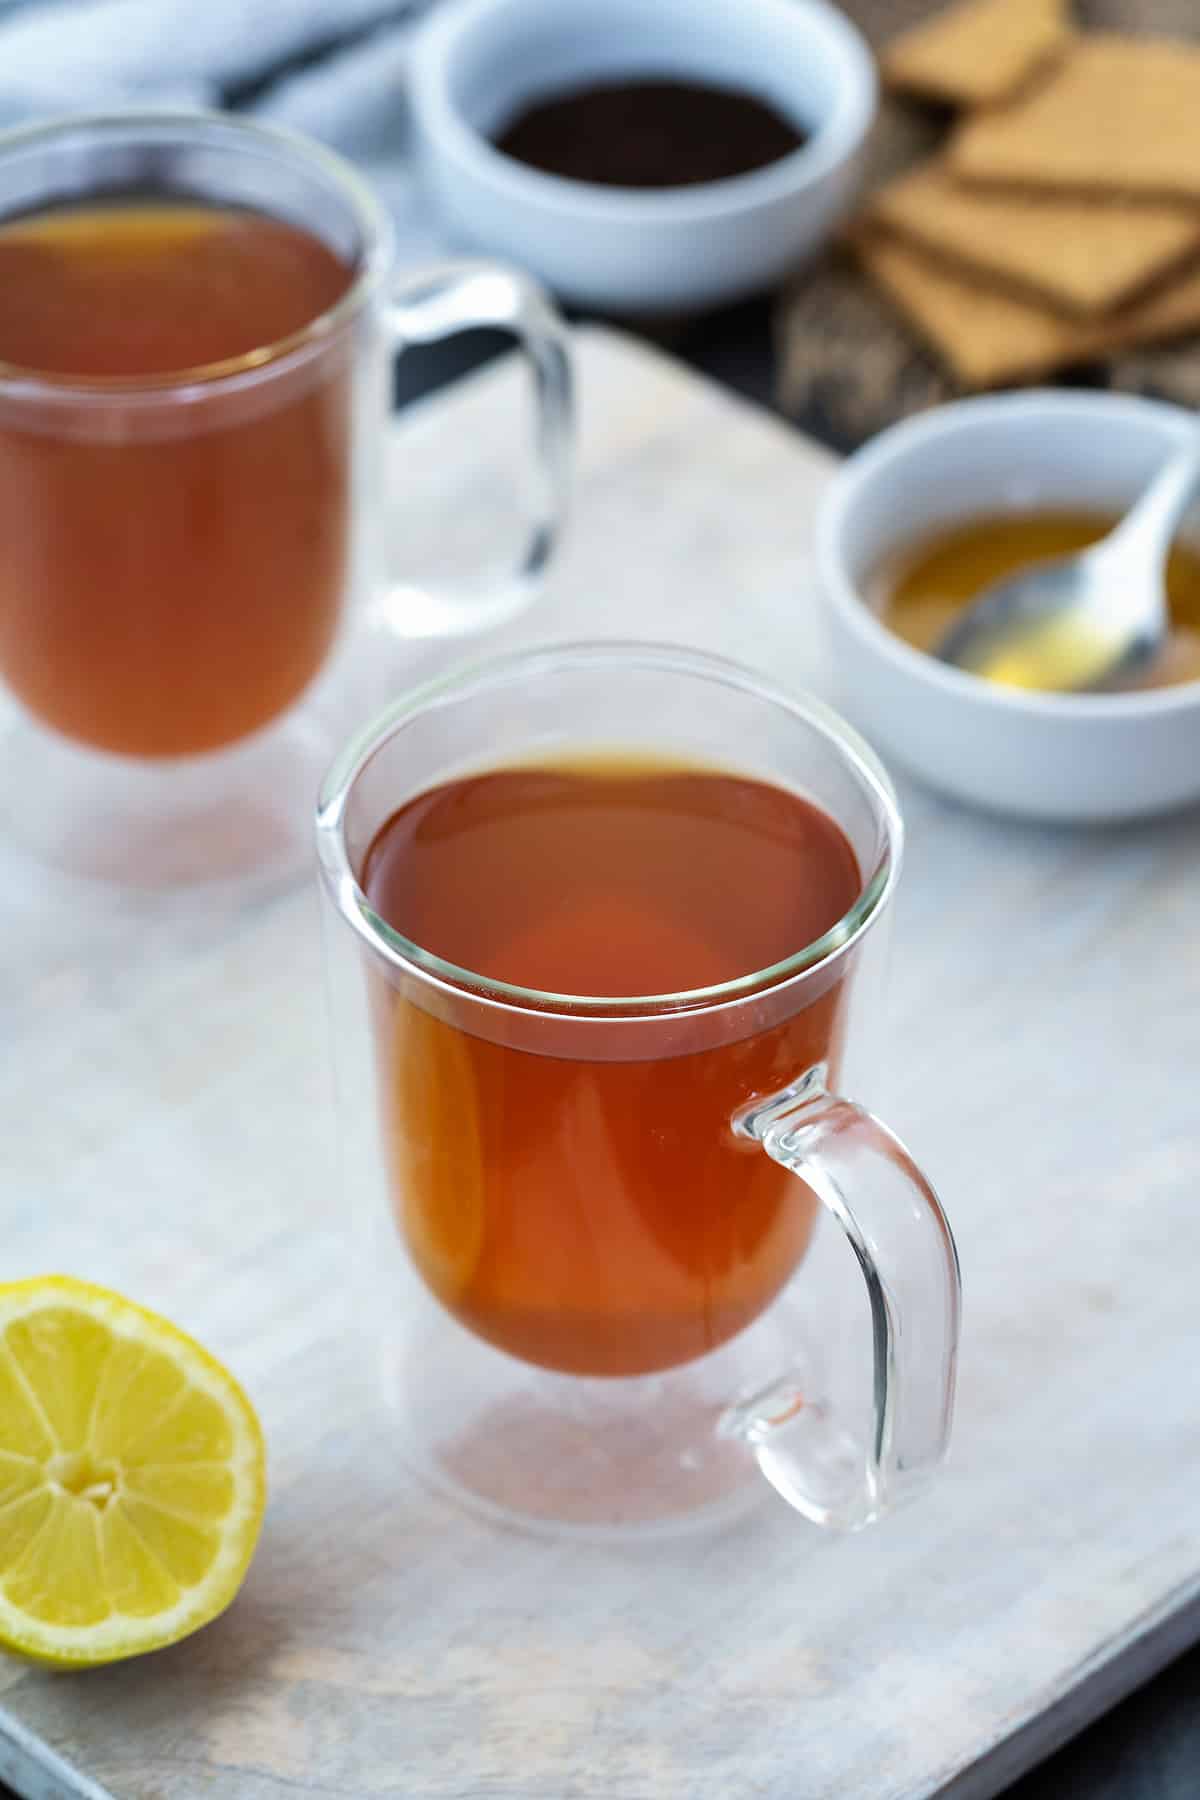 Honey and Lemon Tea in a cup placed on a white table.